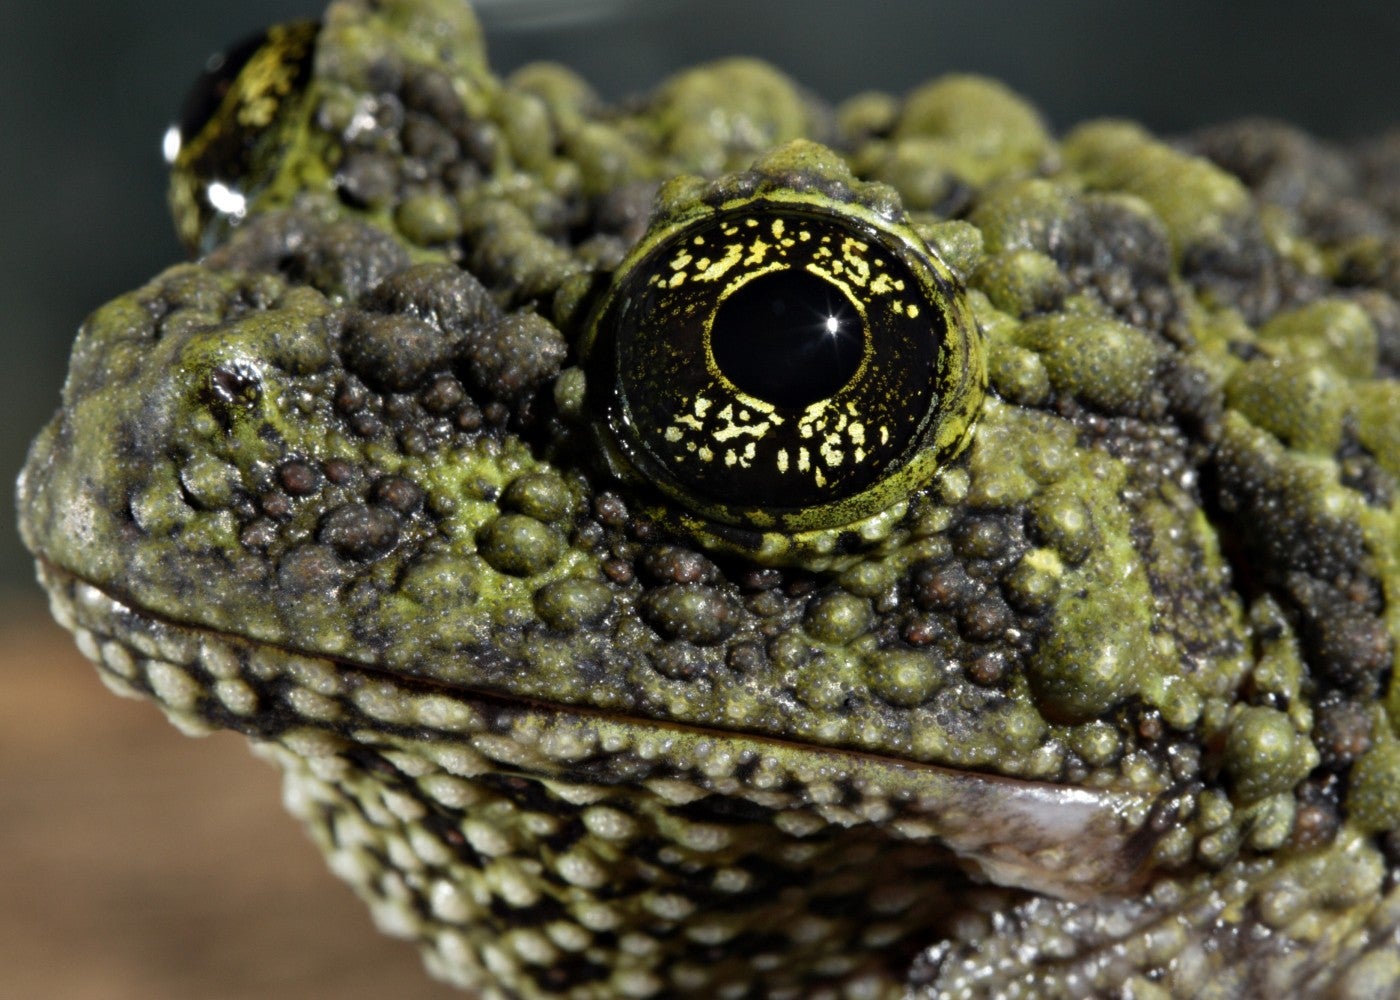 Care and Breeding the Vietnamese Mossy Frog - Reptiles Magazine